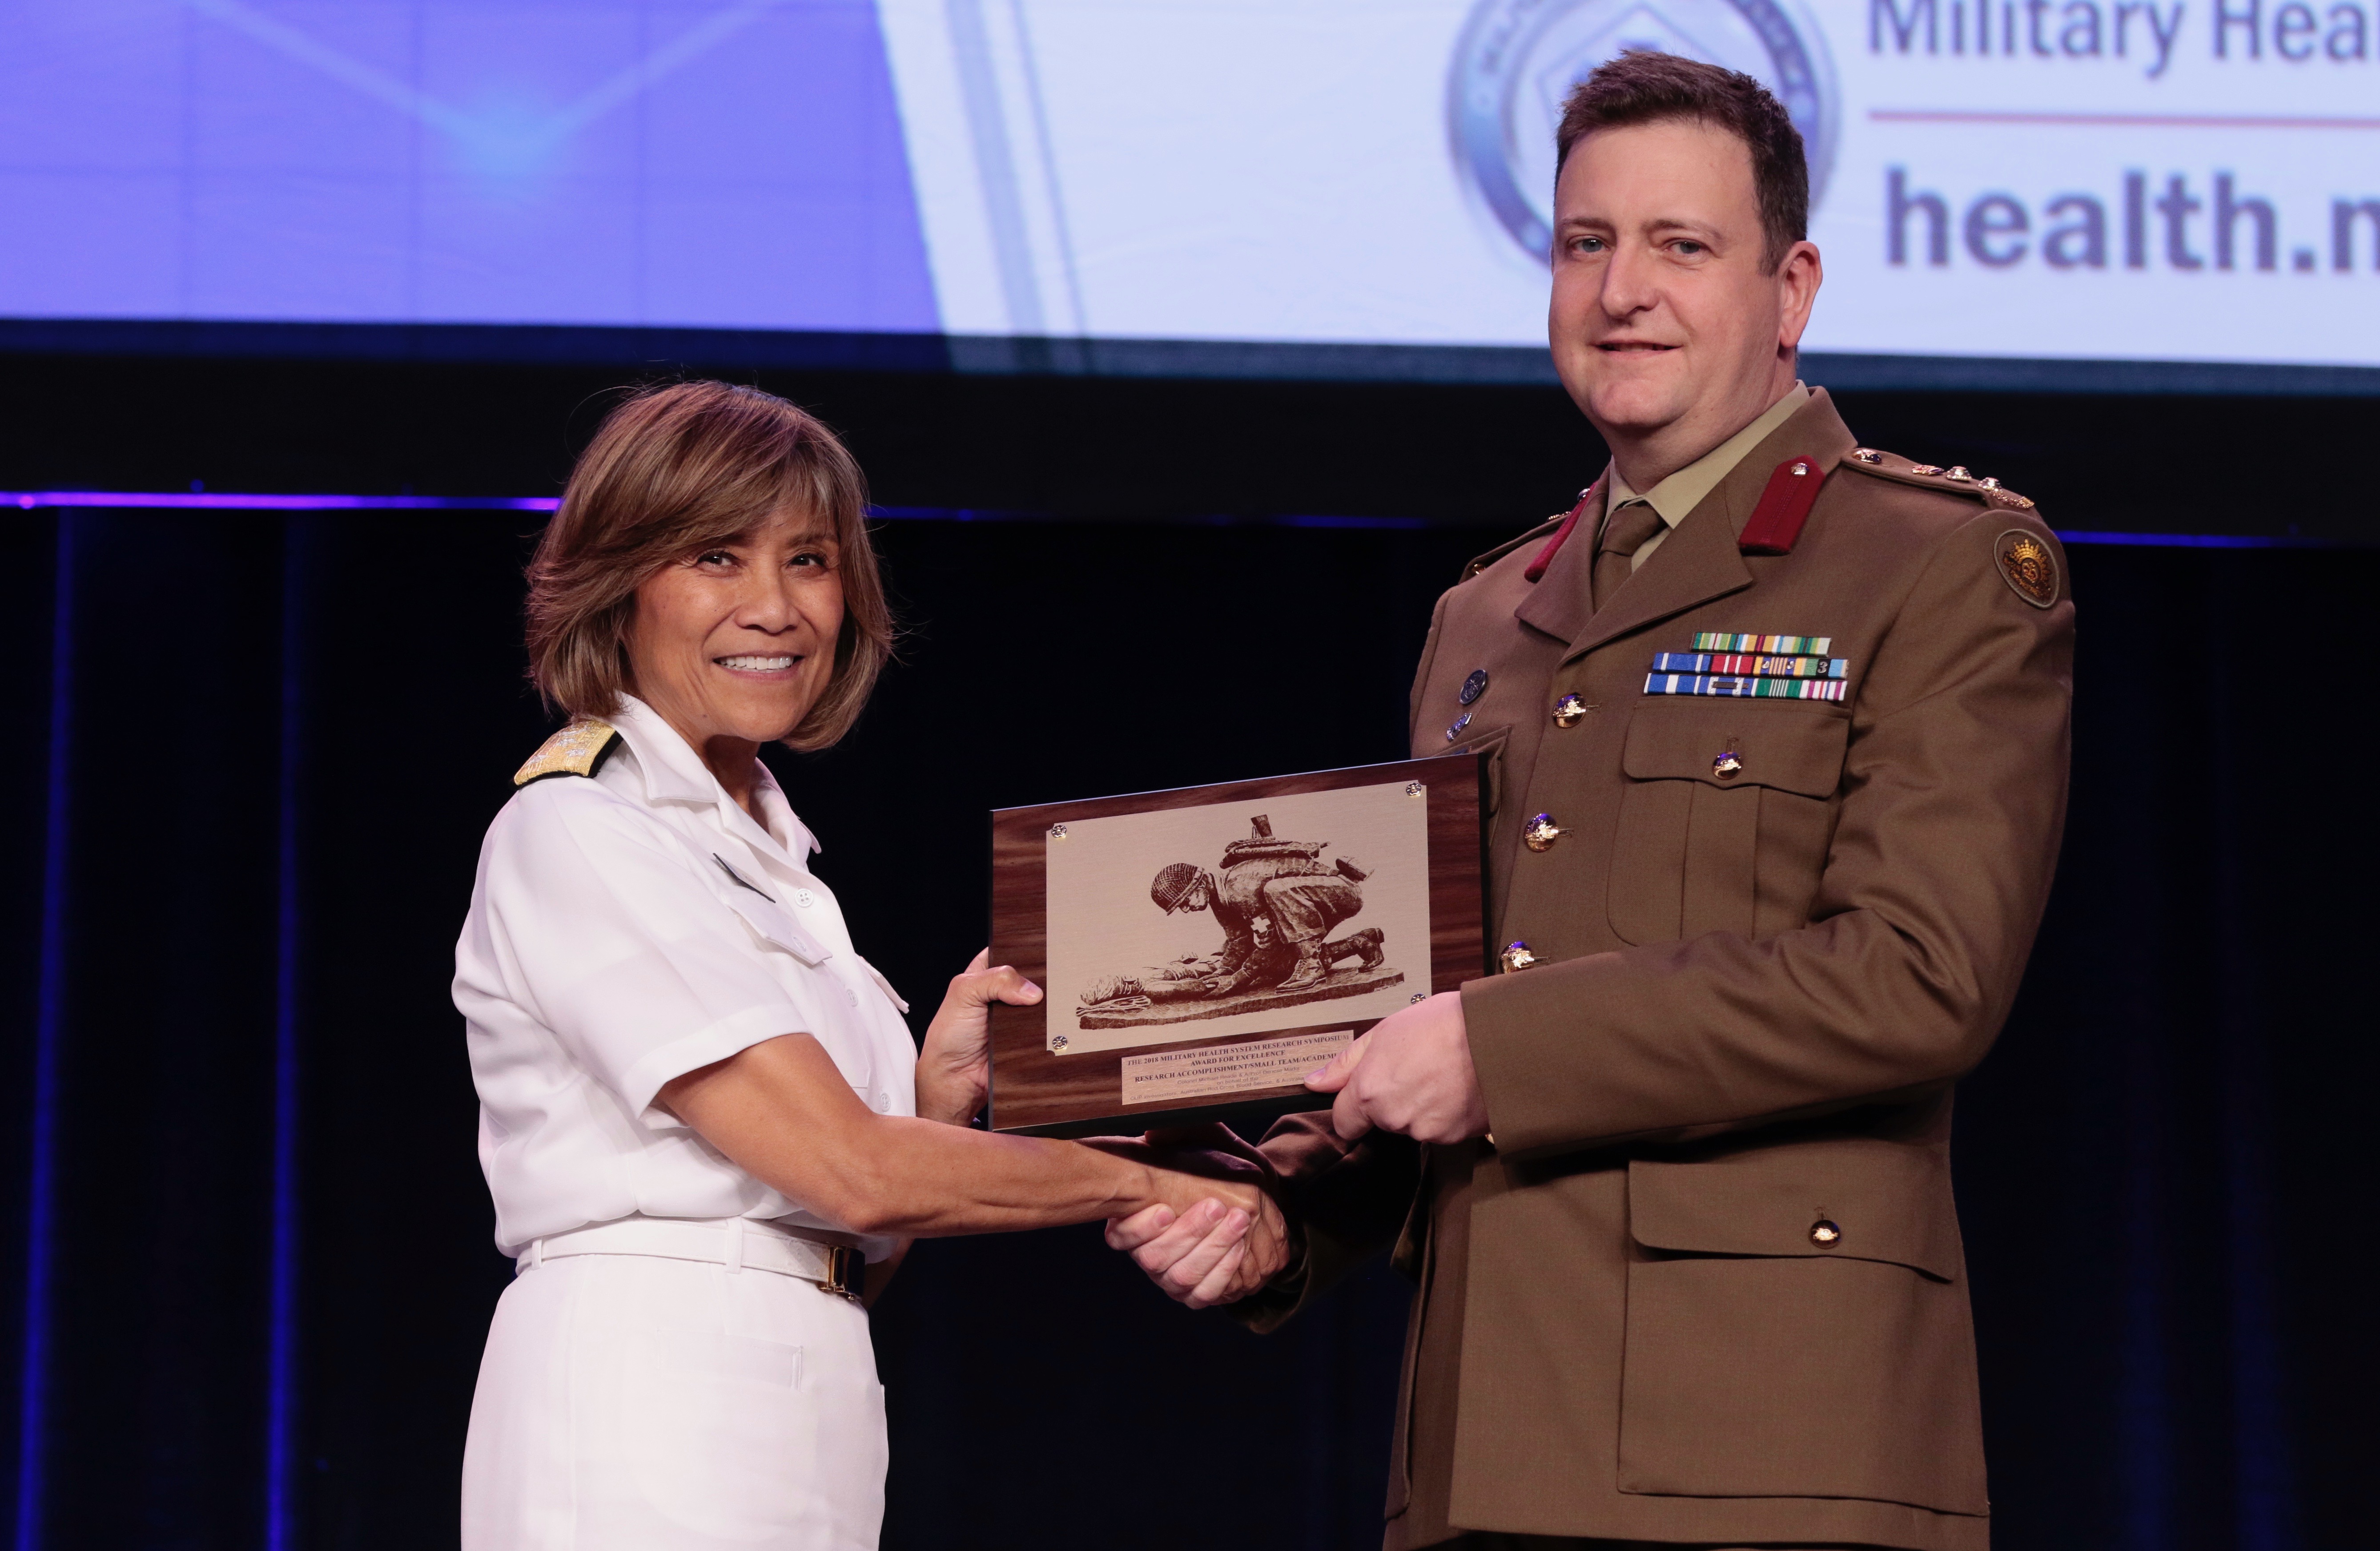 Professor Michael Reade accepting the award at the US Military Health System Research Symposium in Orlando, Florida.